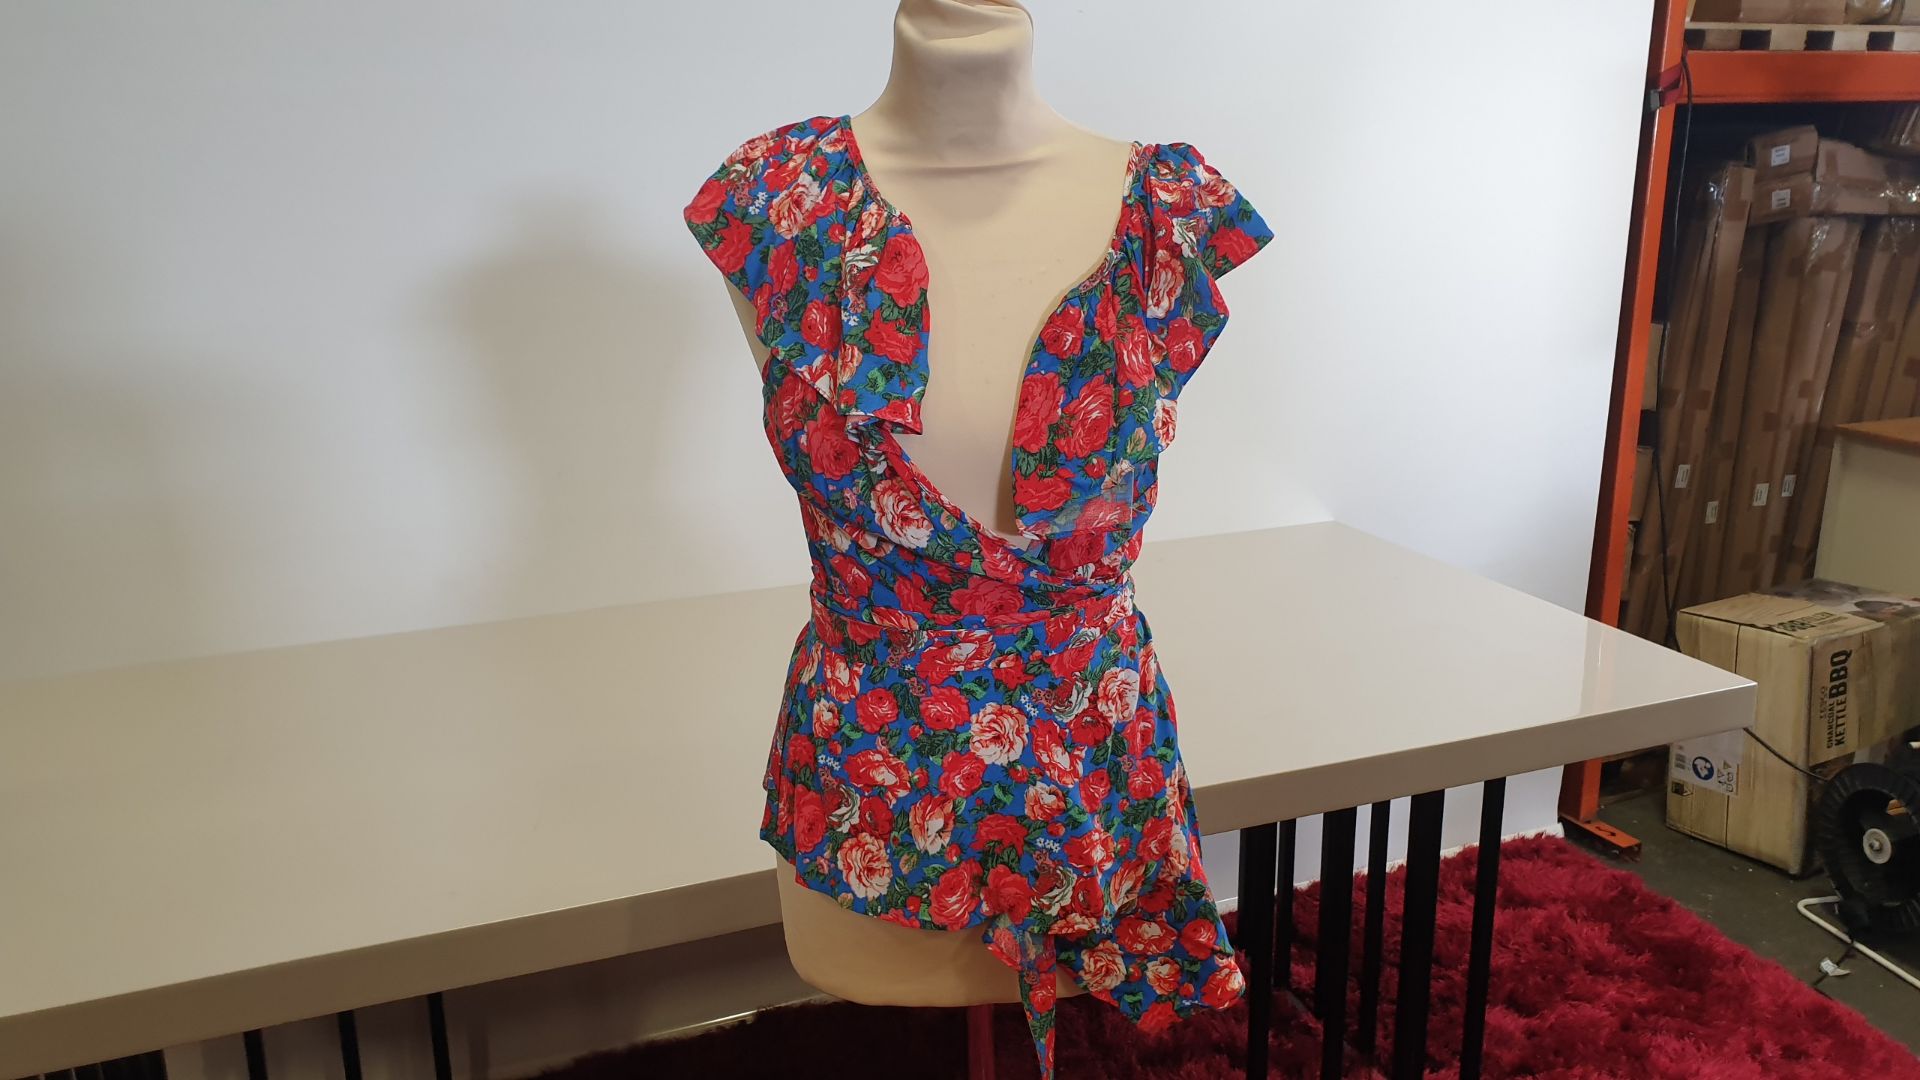 22 X BRAND NEW TOPSHOP RED AND BLUE FLORAL DRESSES IN SIZES UK 6/8